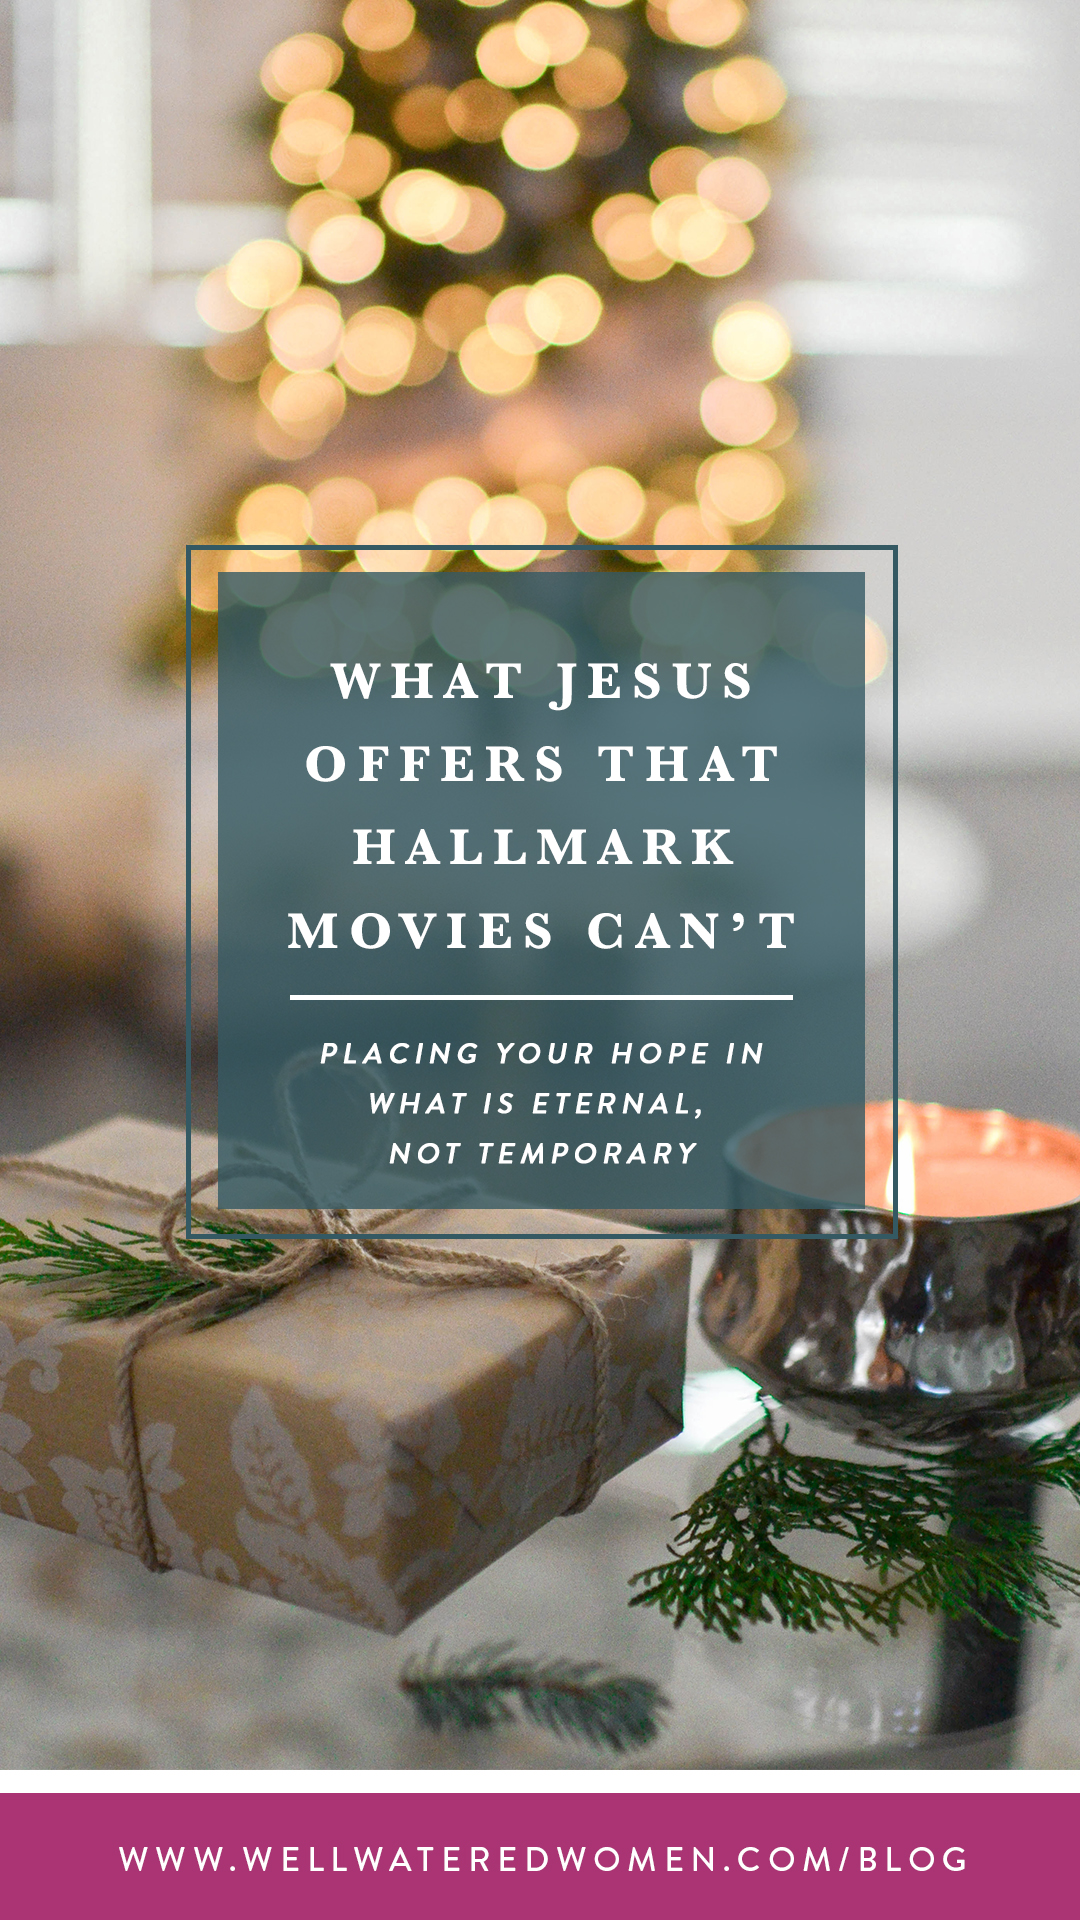 What Jesus Offers That Hallmark Movies Can't: placing your hope in what's eternal, not temporary.